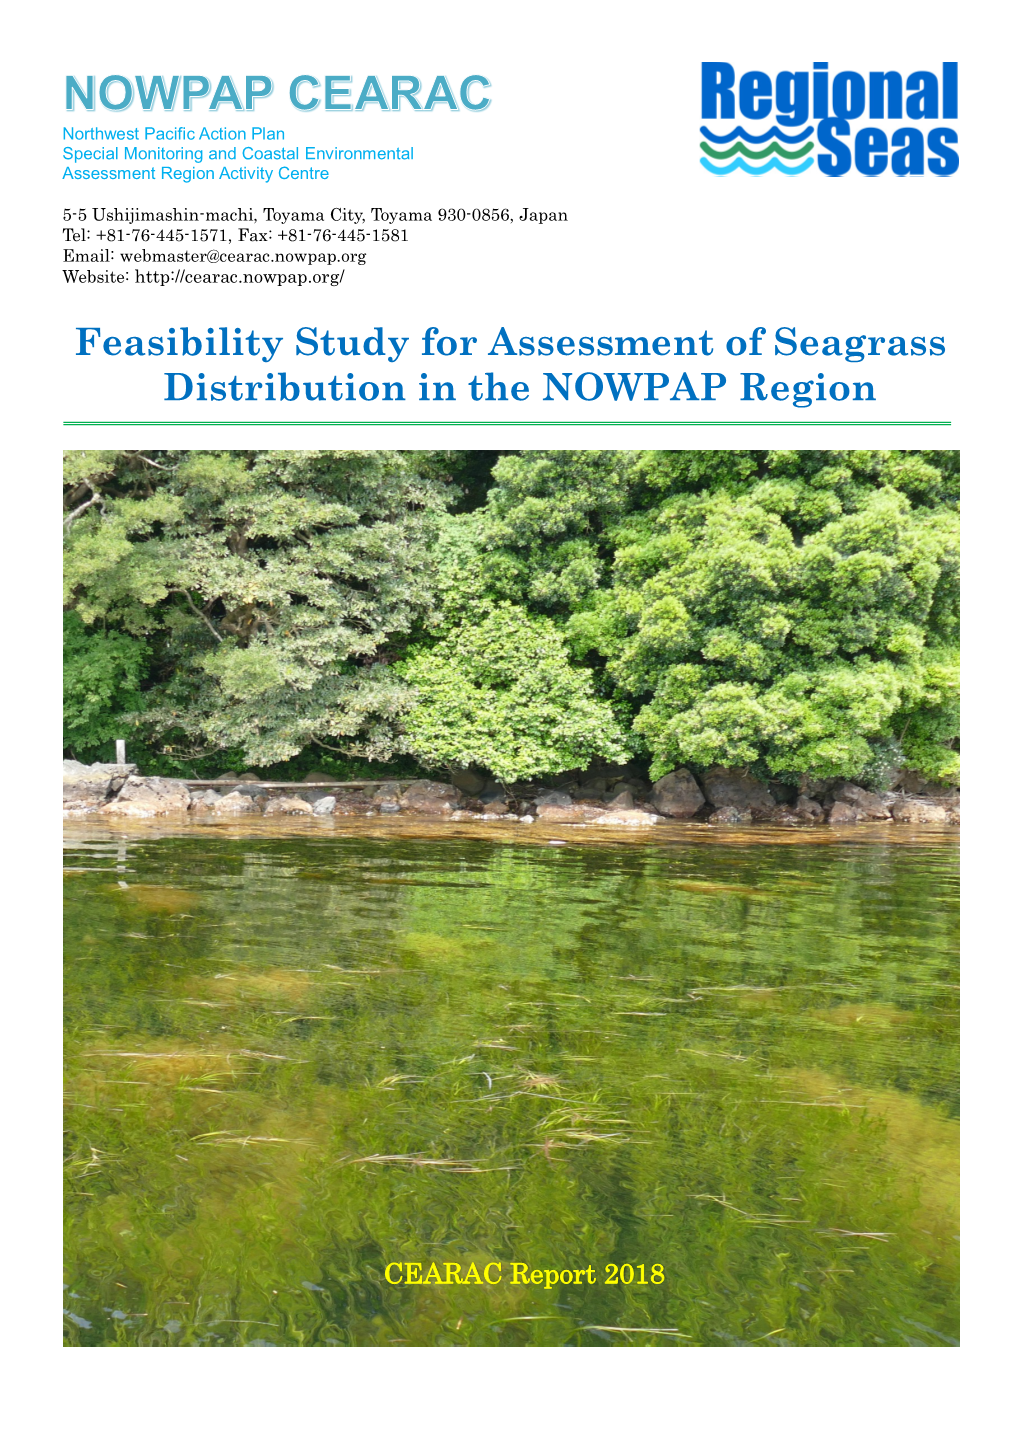 Feasibility Study for Assessment of Seagrass Distribution in the NOWPAP Region